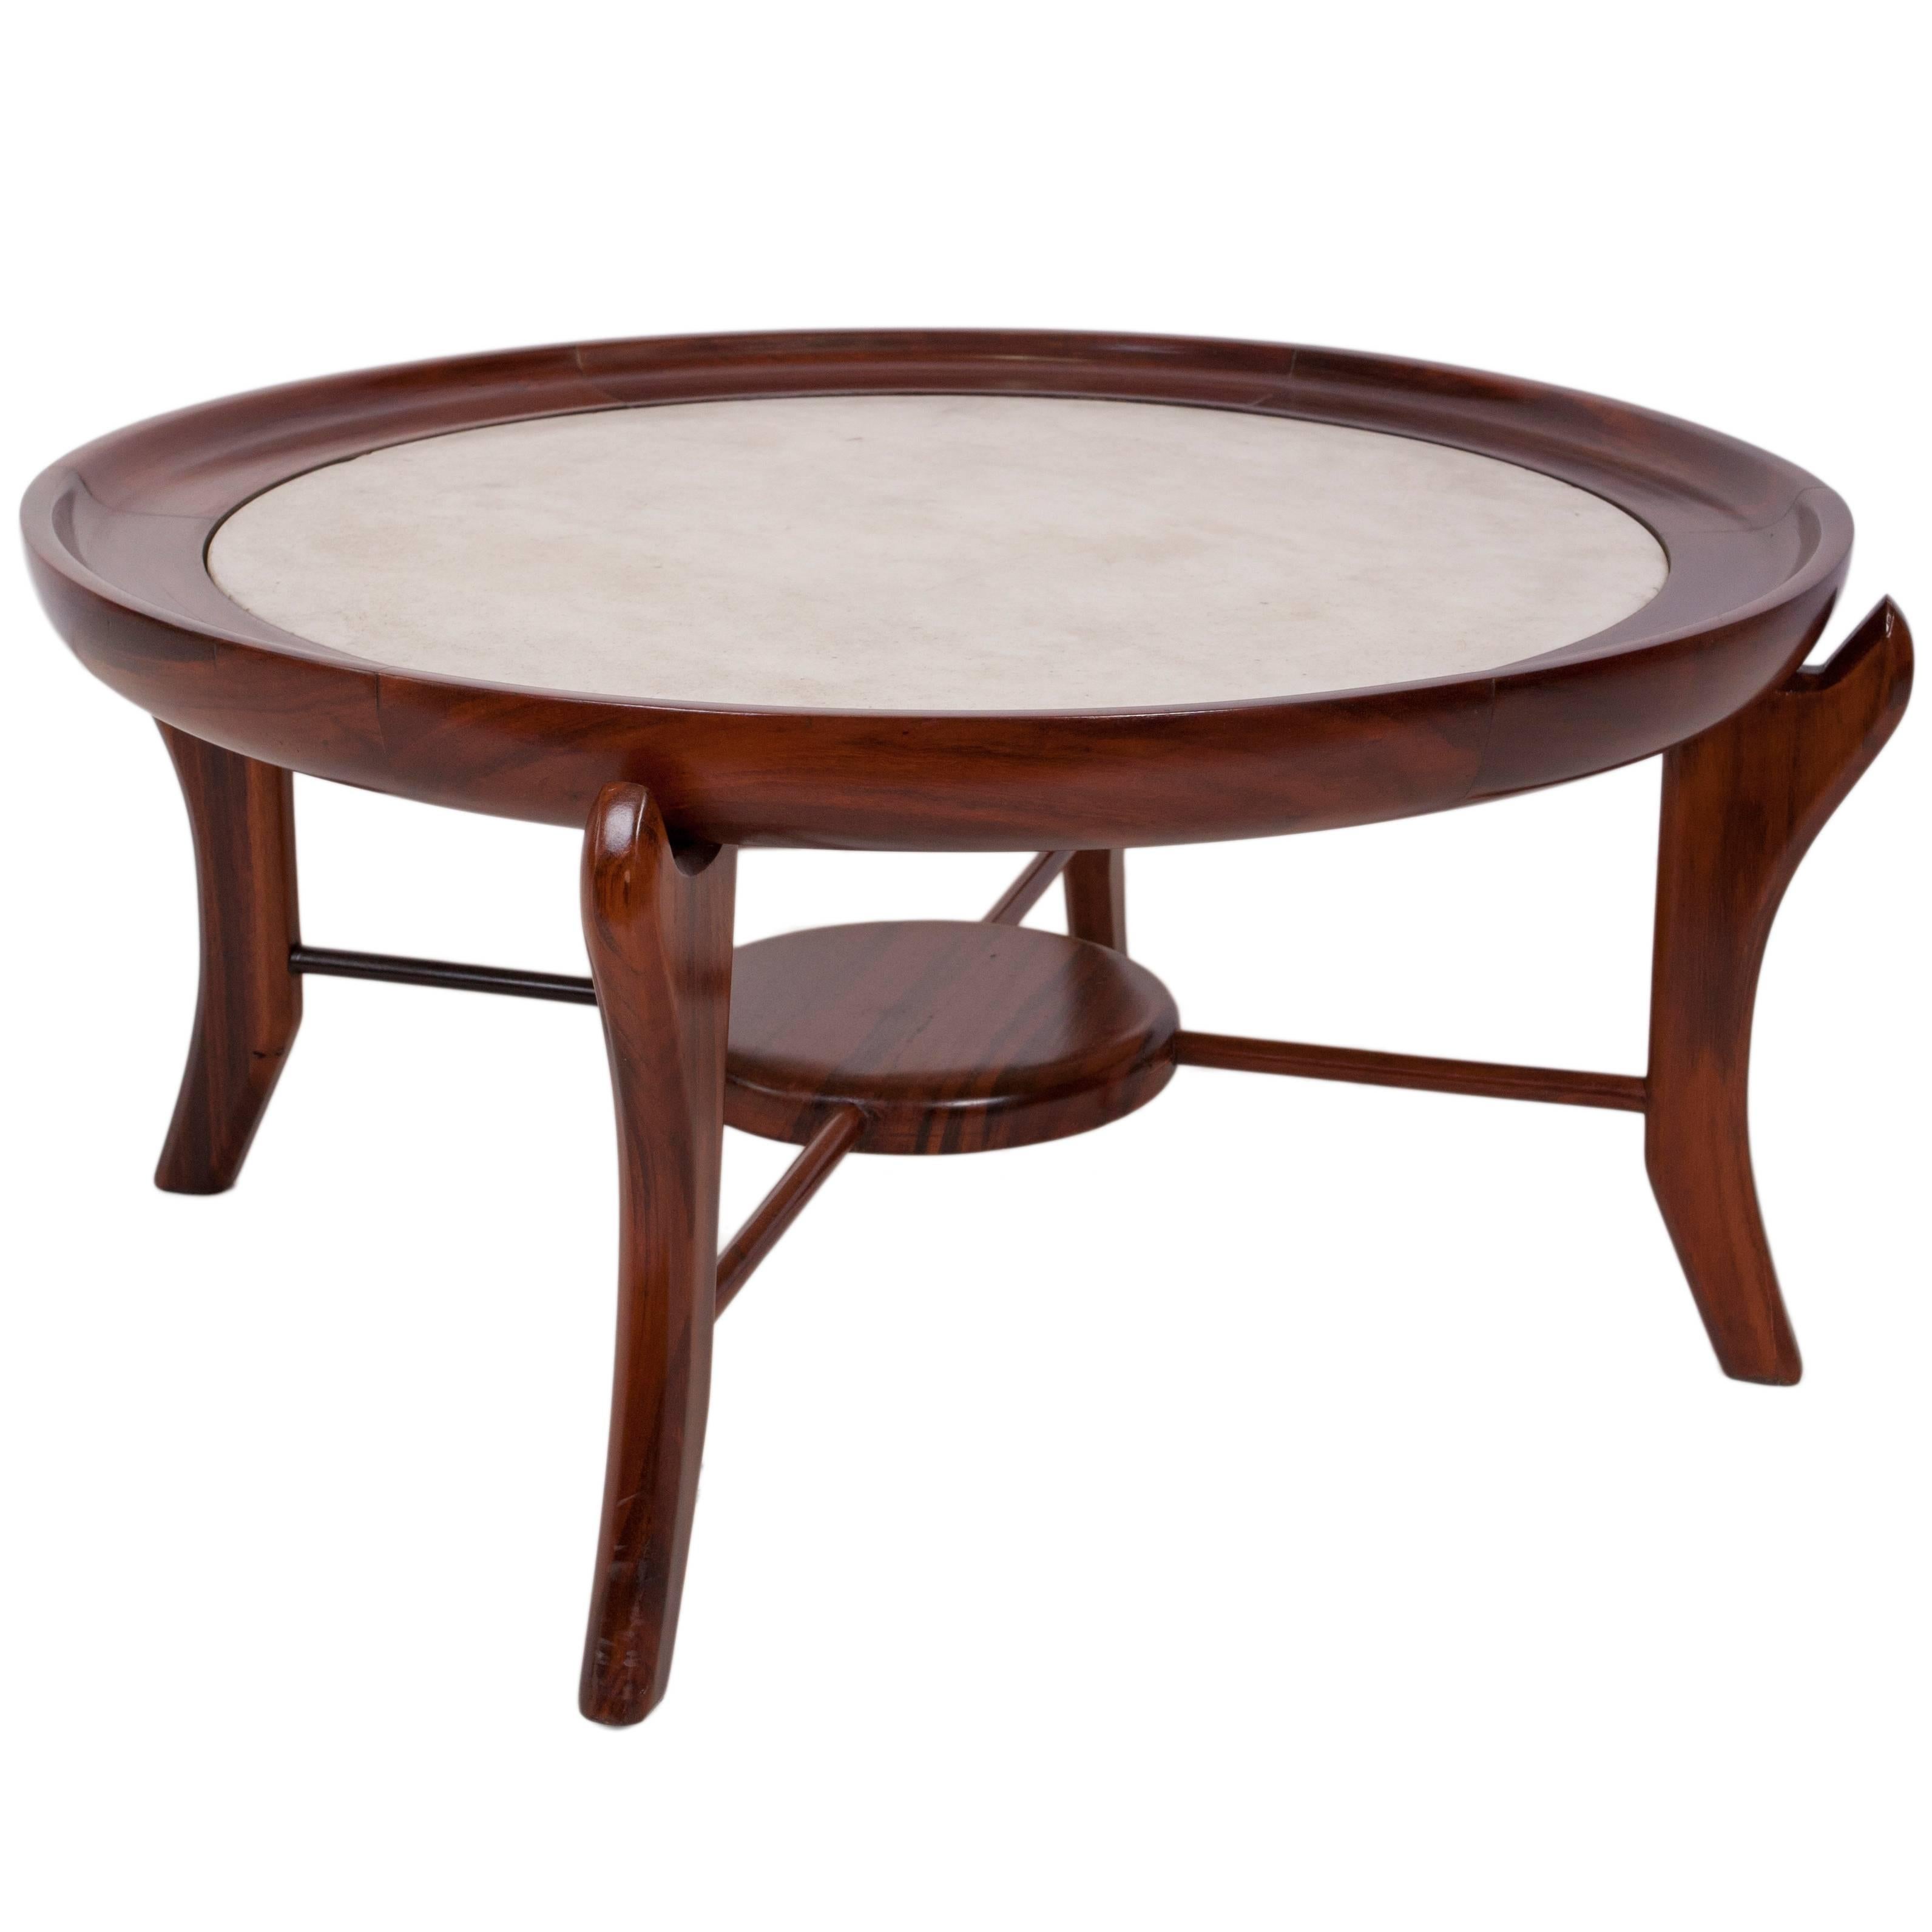 This circa 1960s 'Maracana~' table attributed to designer Giuseppe Scapinelli, comes in rich Brazilian jacaranda wood, with marble top against a round concave frame, above uniquely formed cabriole legs, with spreaders joined by a central lower tier.